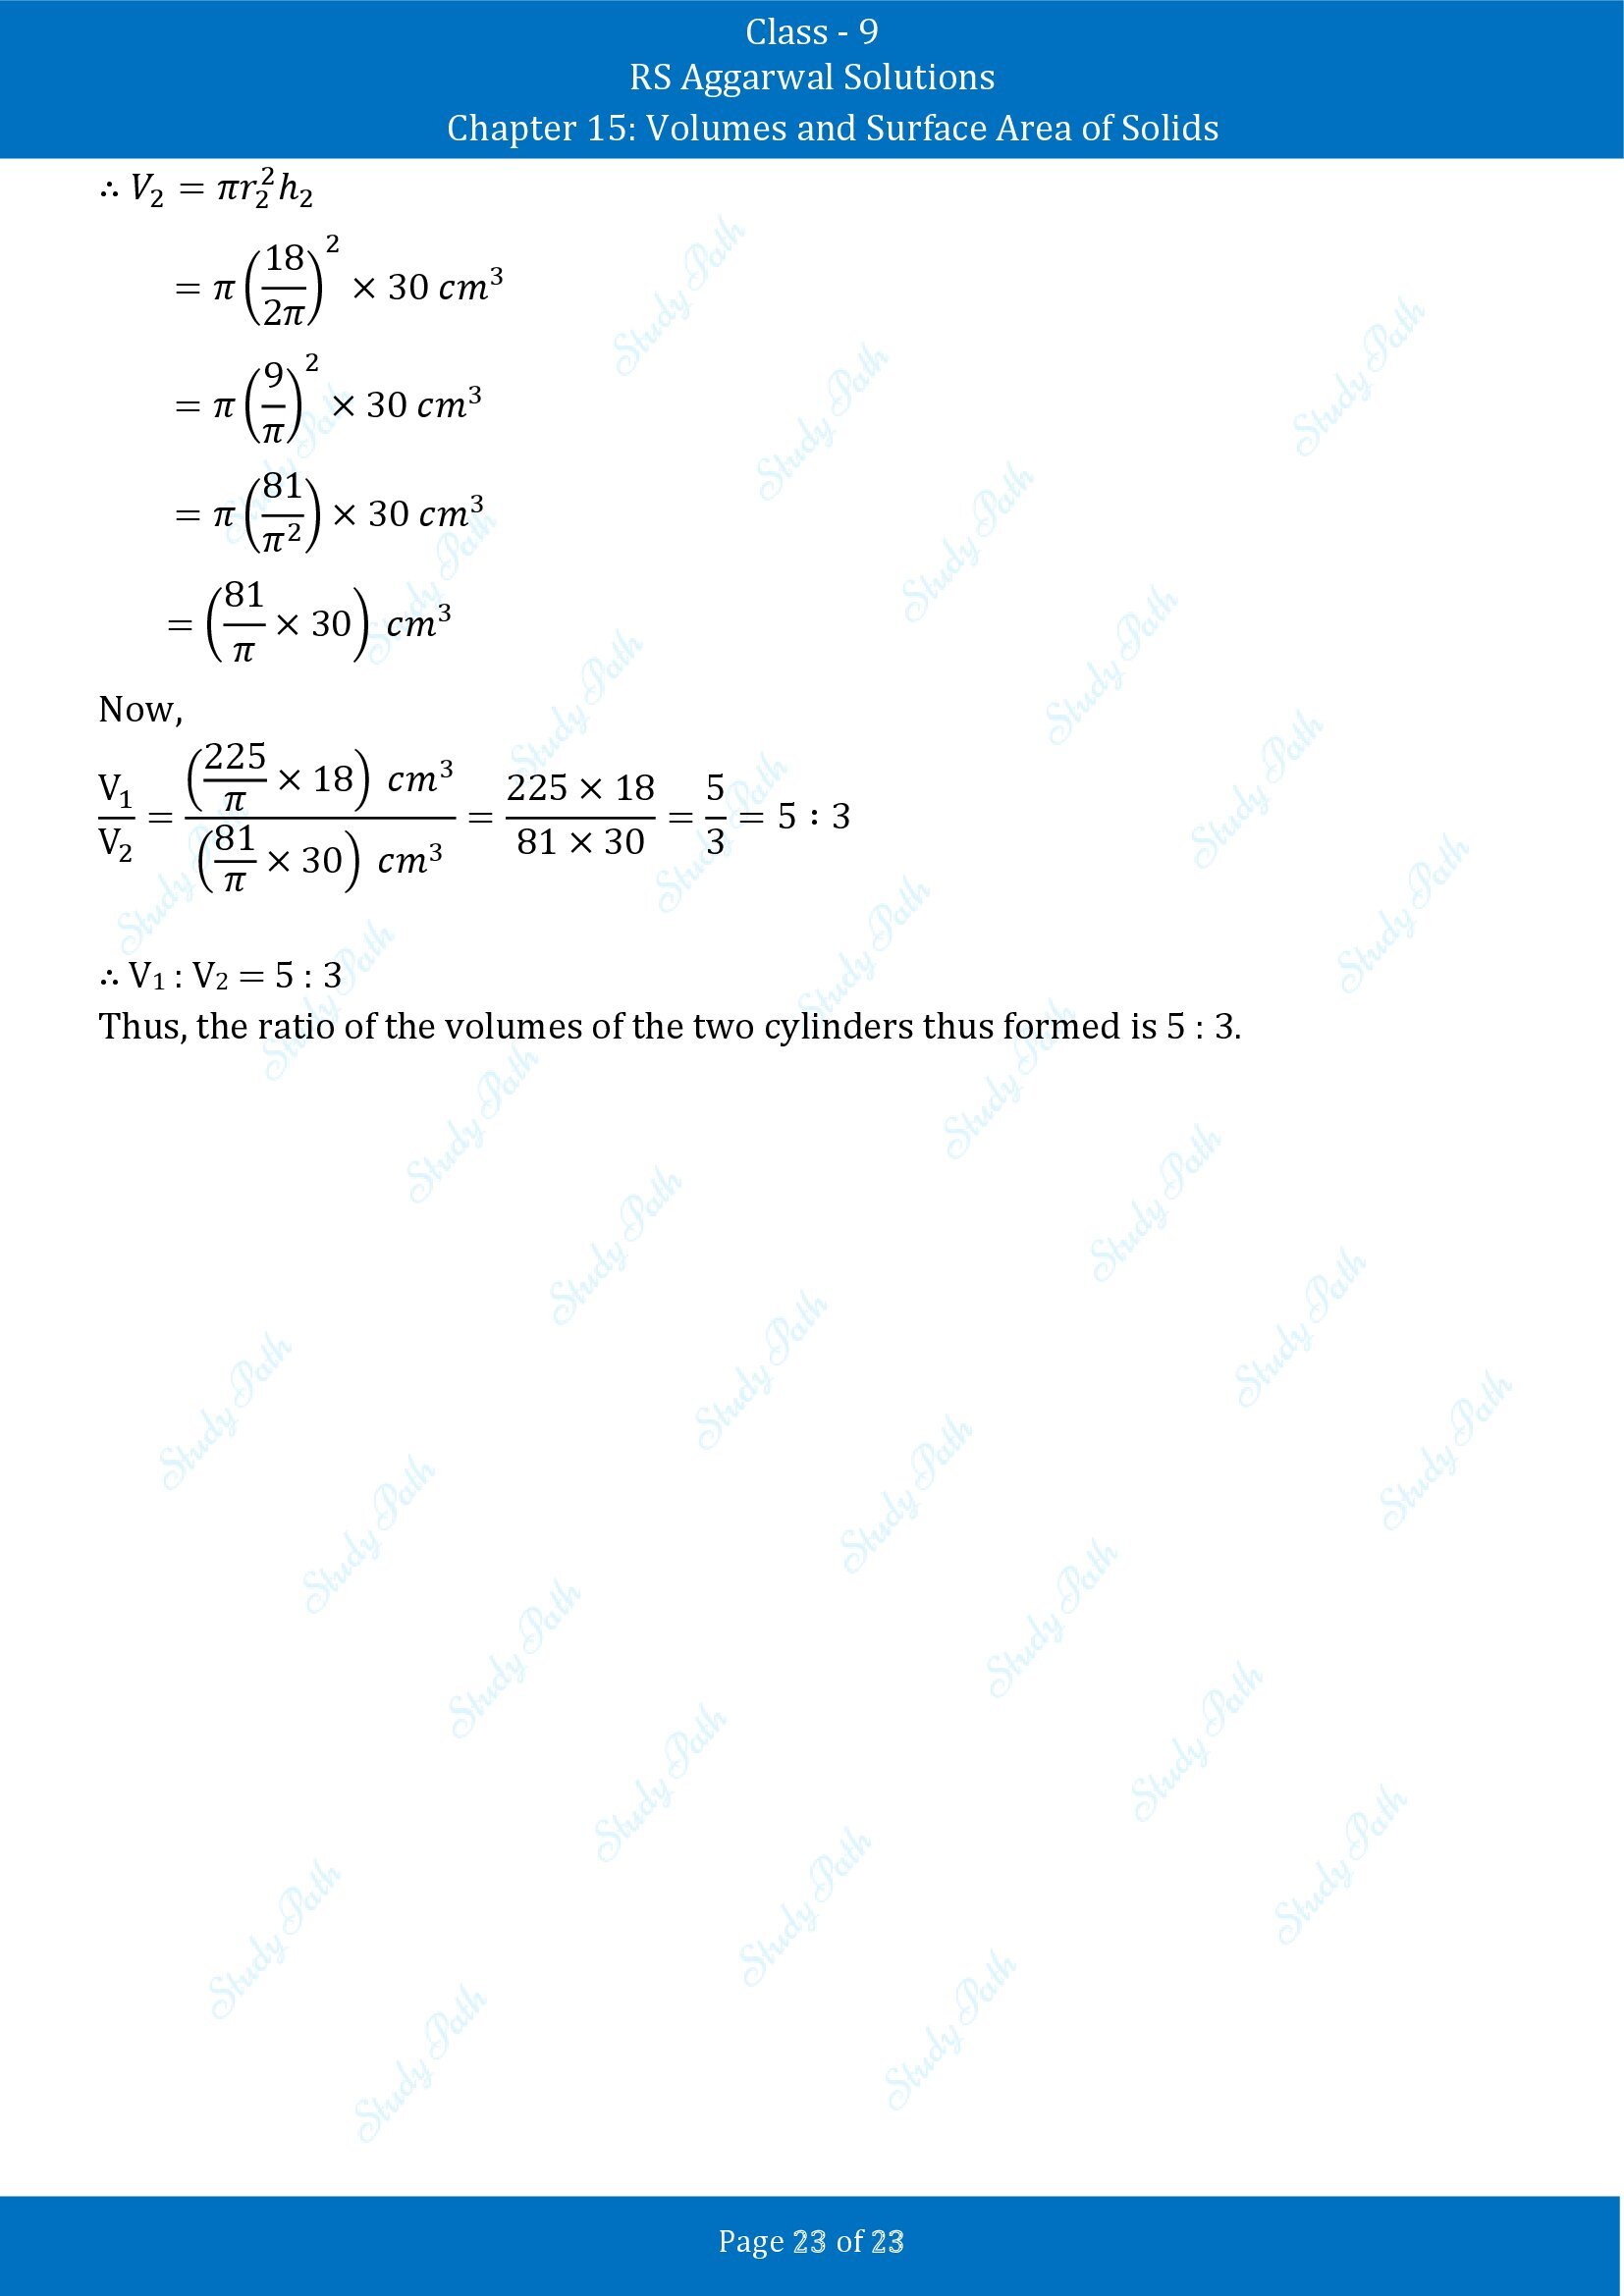 RS Aggarwal Solutions Class 9 Chapter 15 Volumes and Surface Area of Solids Exercise 15B 00023